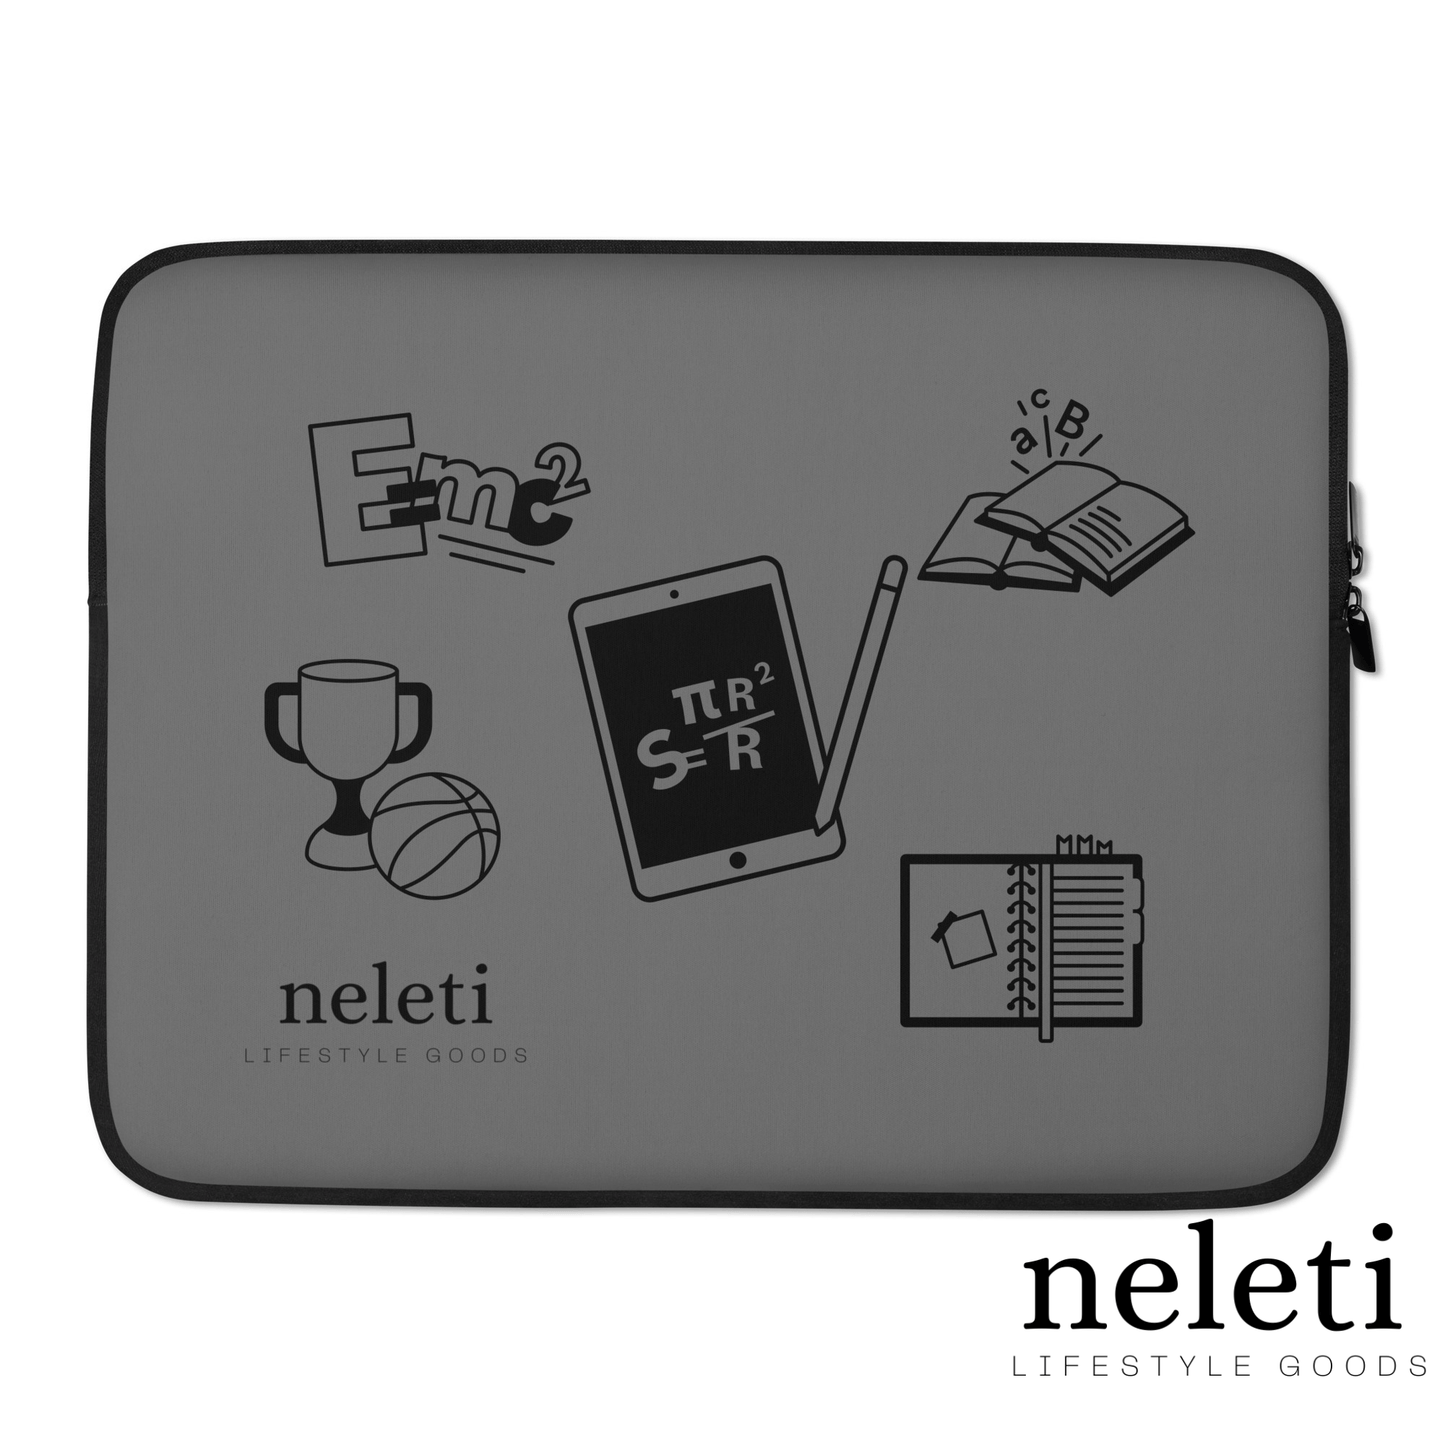 Laptop Sleeves for Students at Neleti.com - Stylish and Protective Solutions